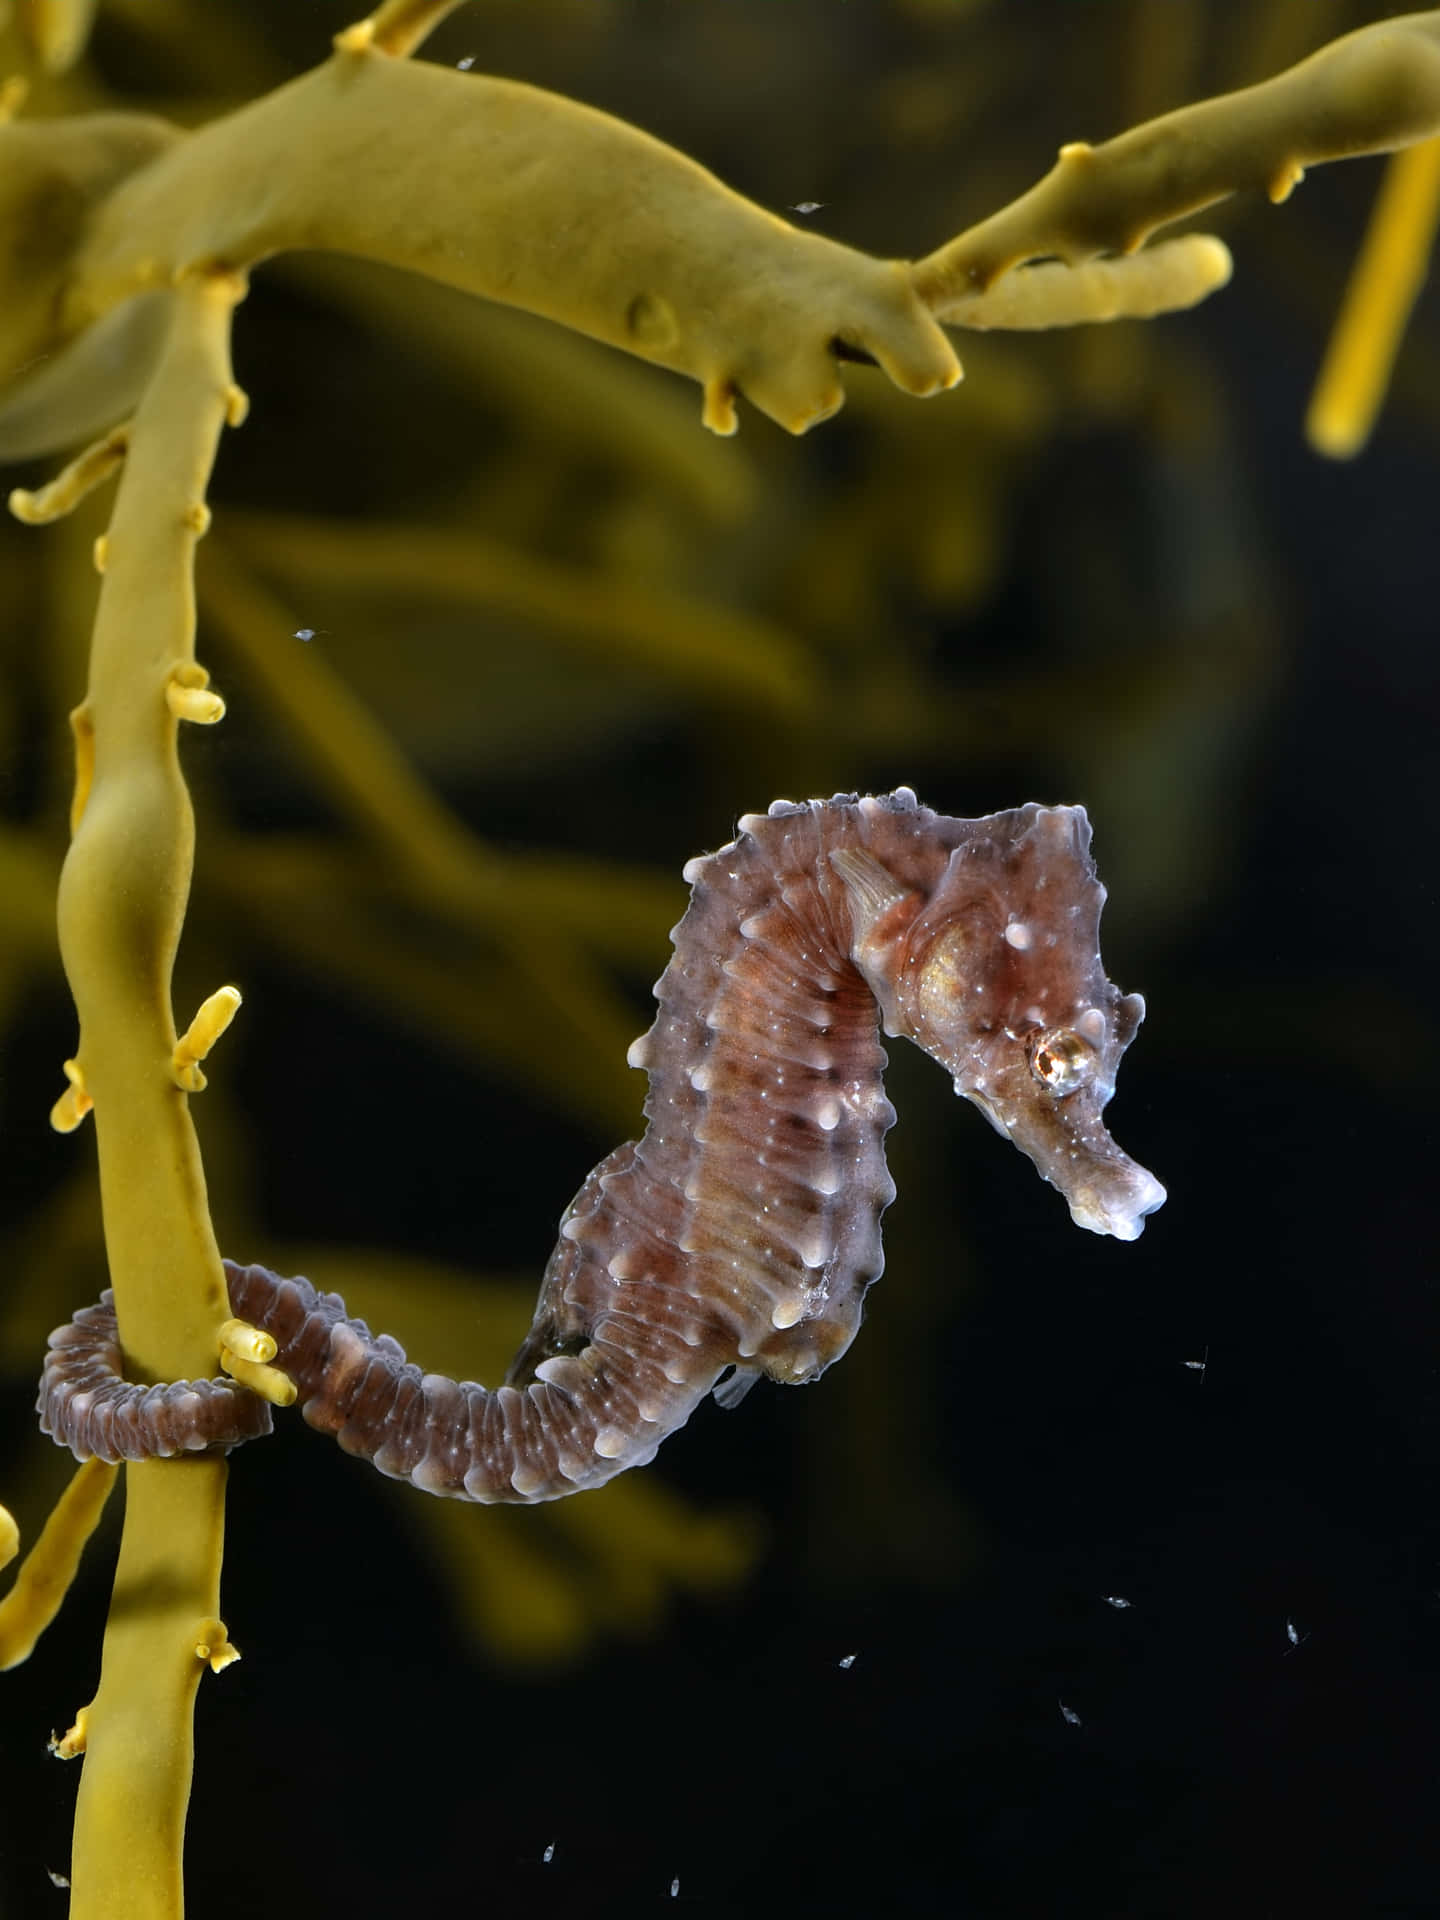 A seahorse calmly swimming in the blue ocean